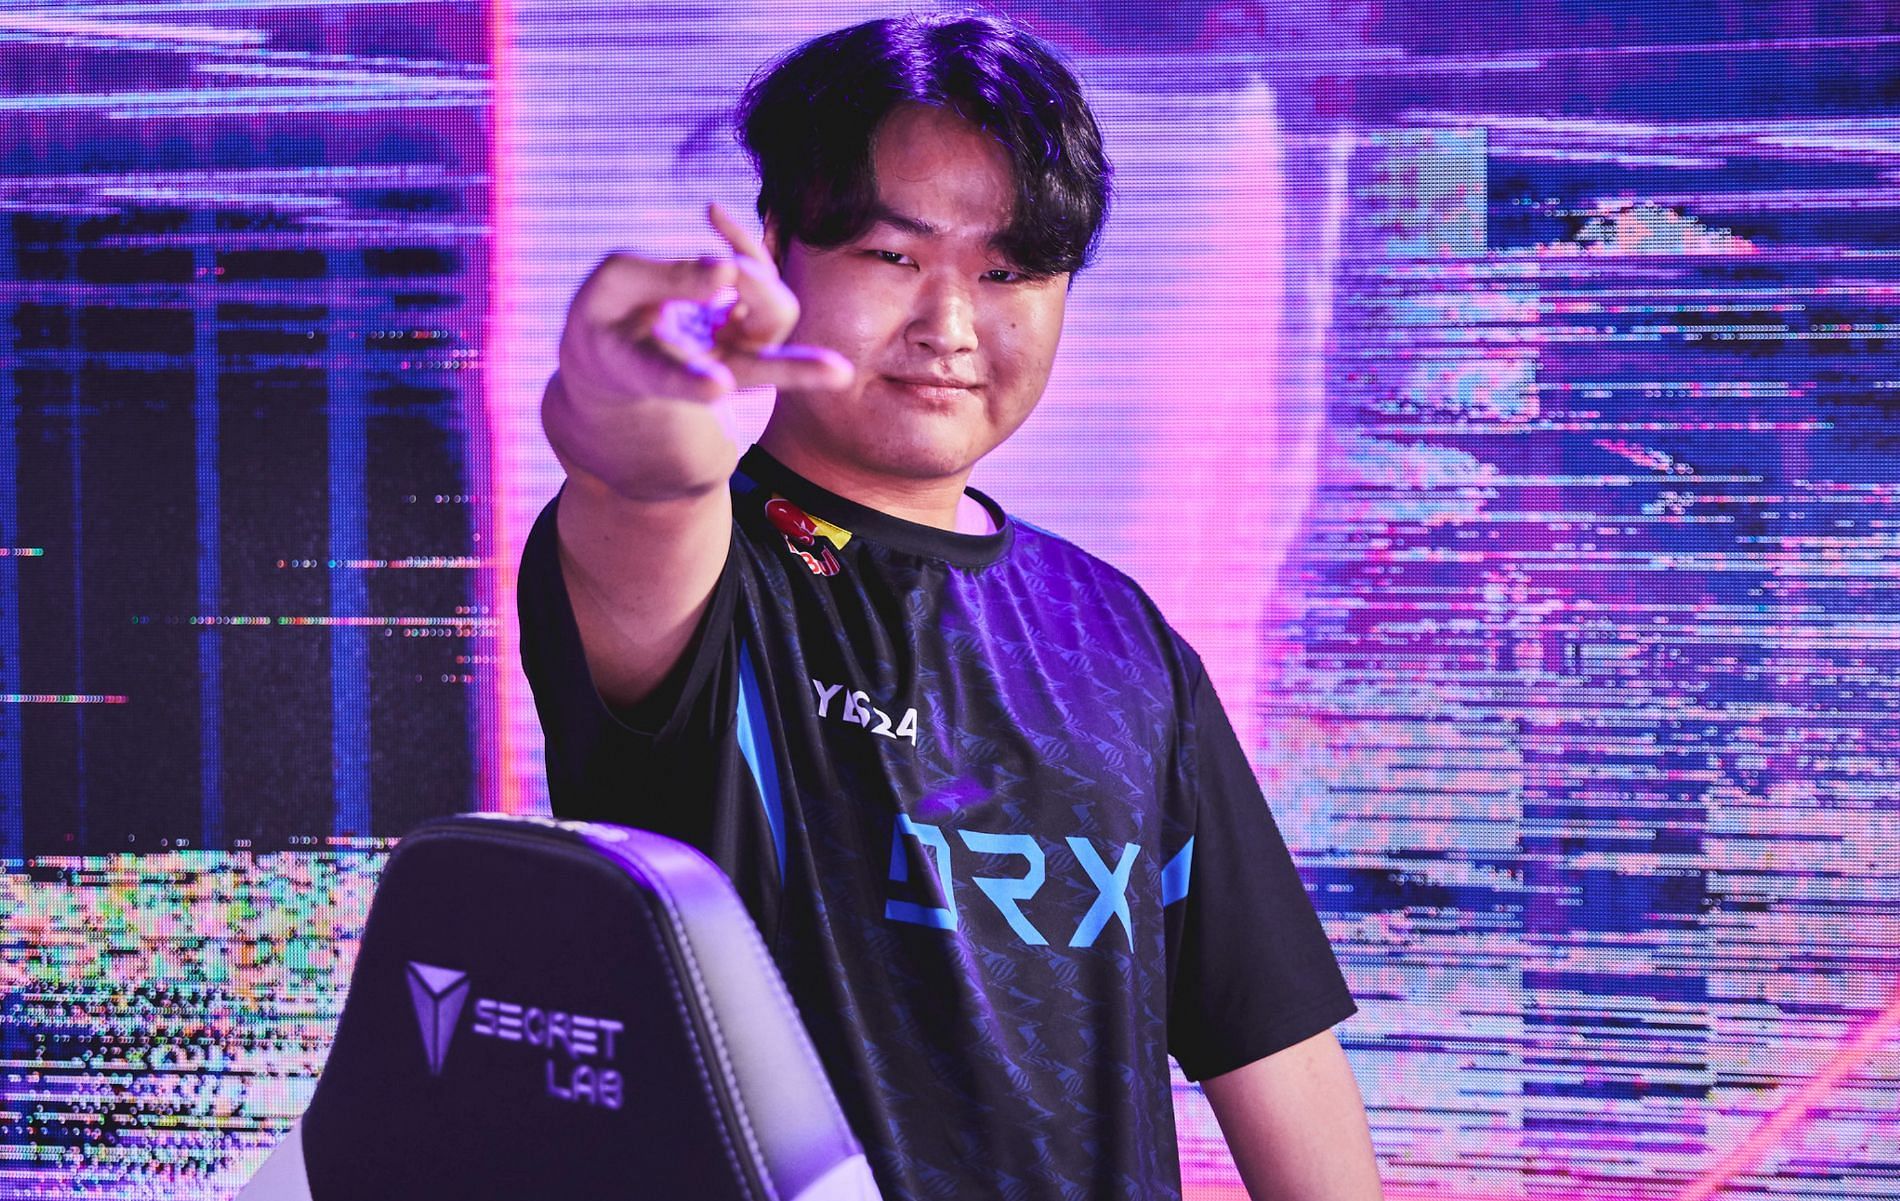 Zest is the IGL and Initiator Main for DRX, one of the 16 teams to appear in the upcoming Valorant Champions 2022. (Image via Flickr)